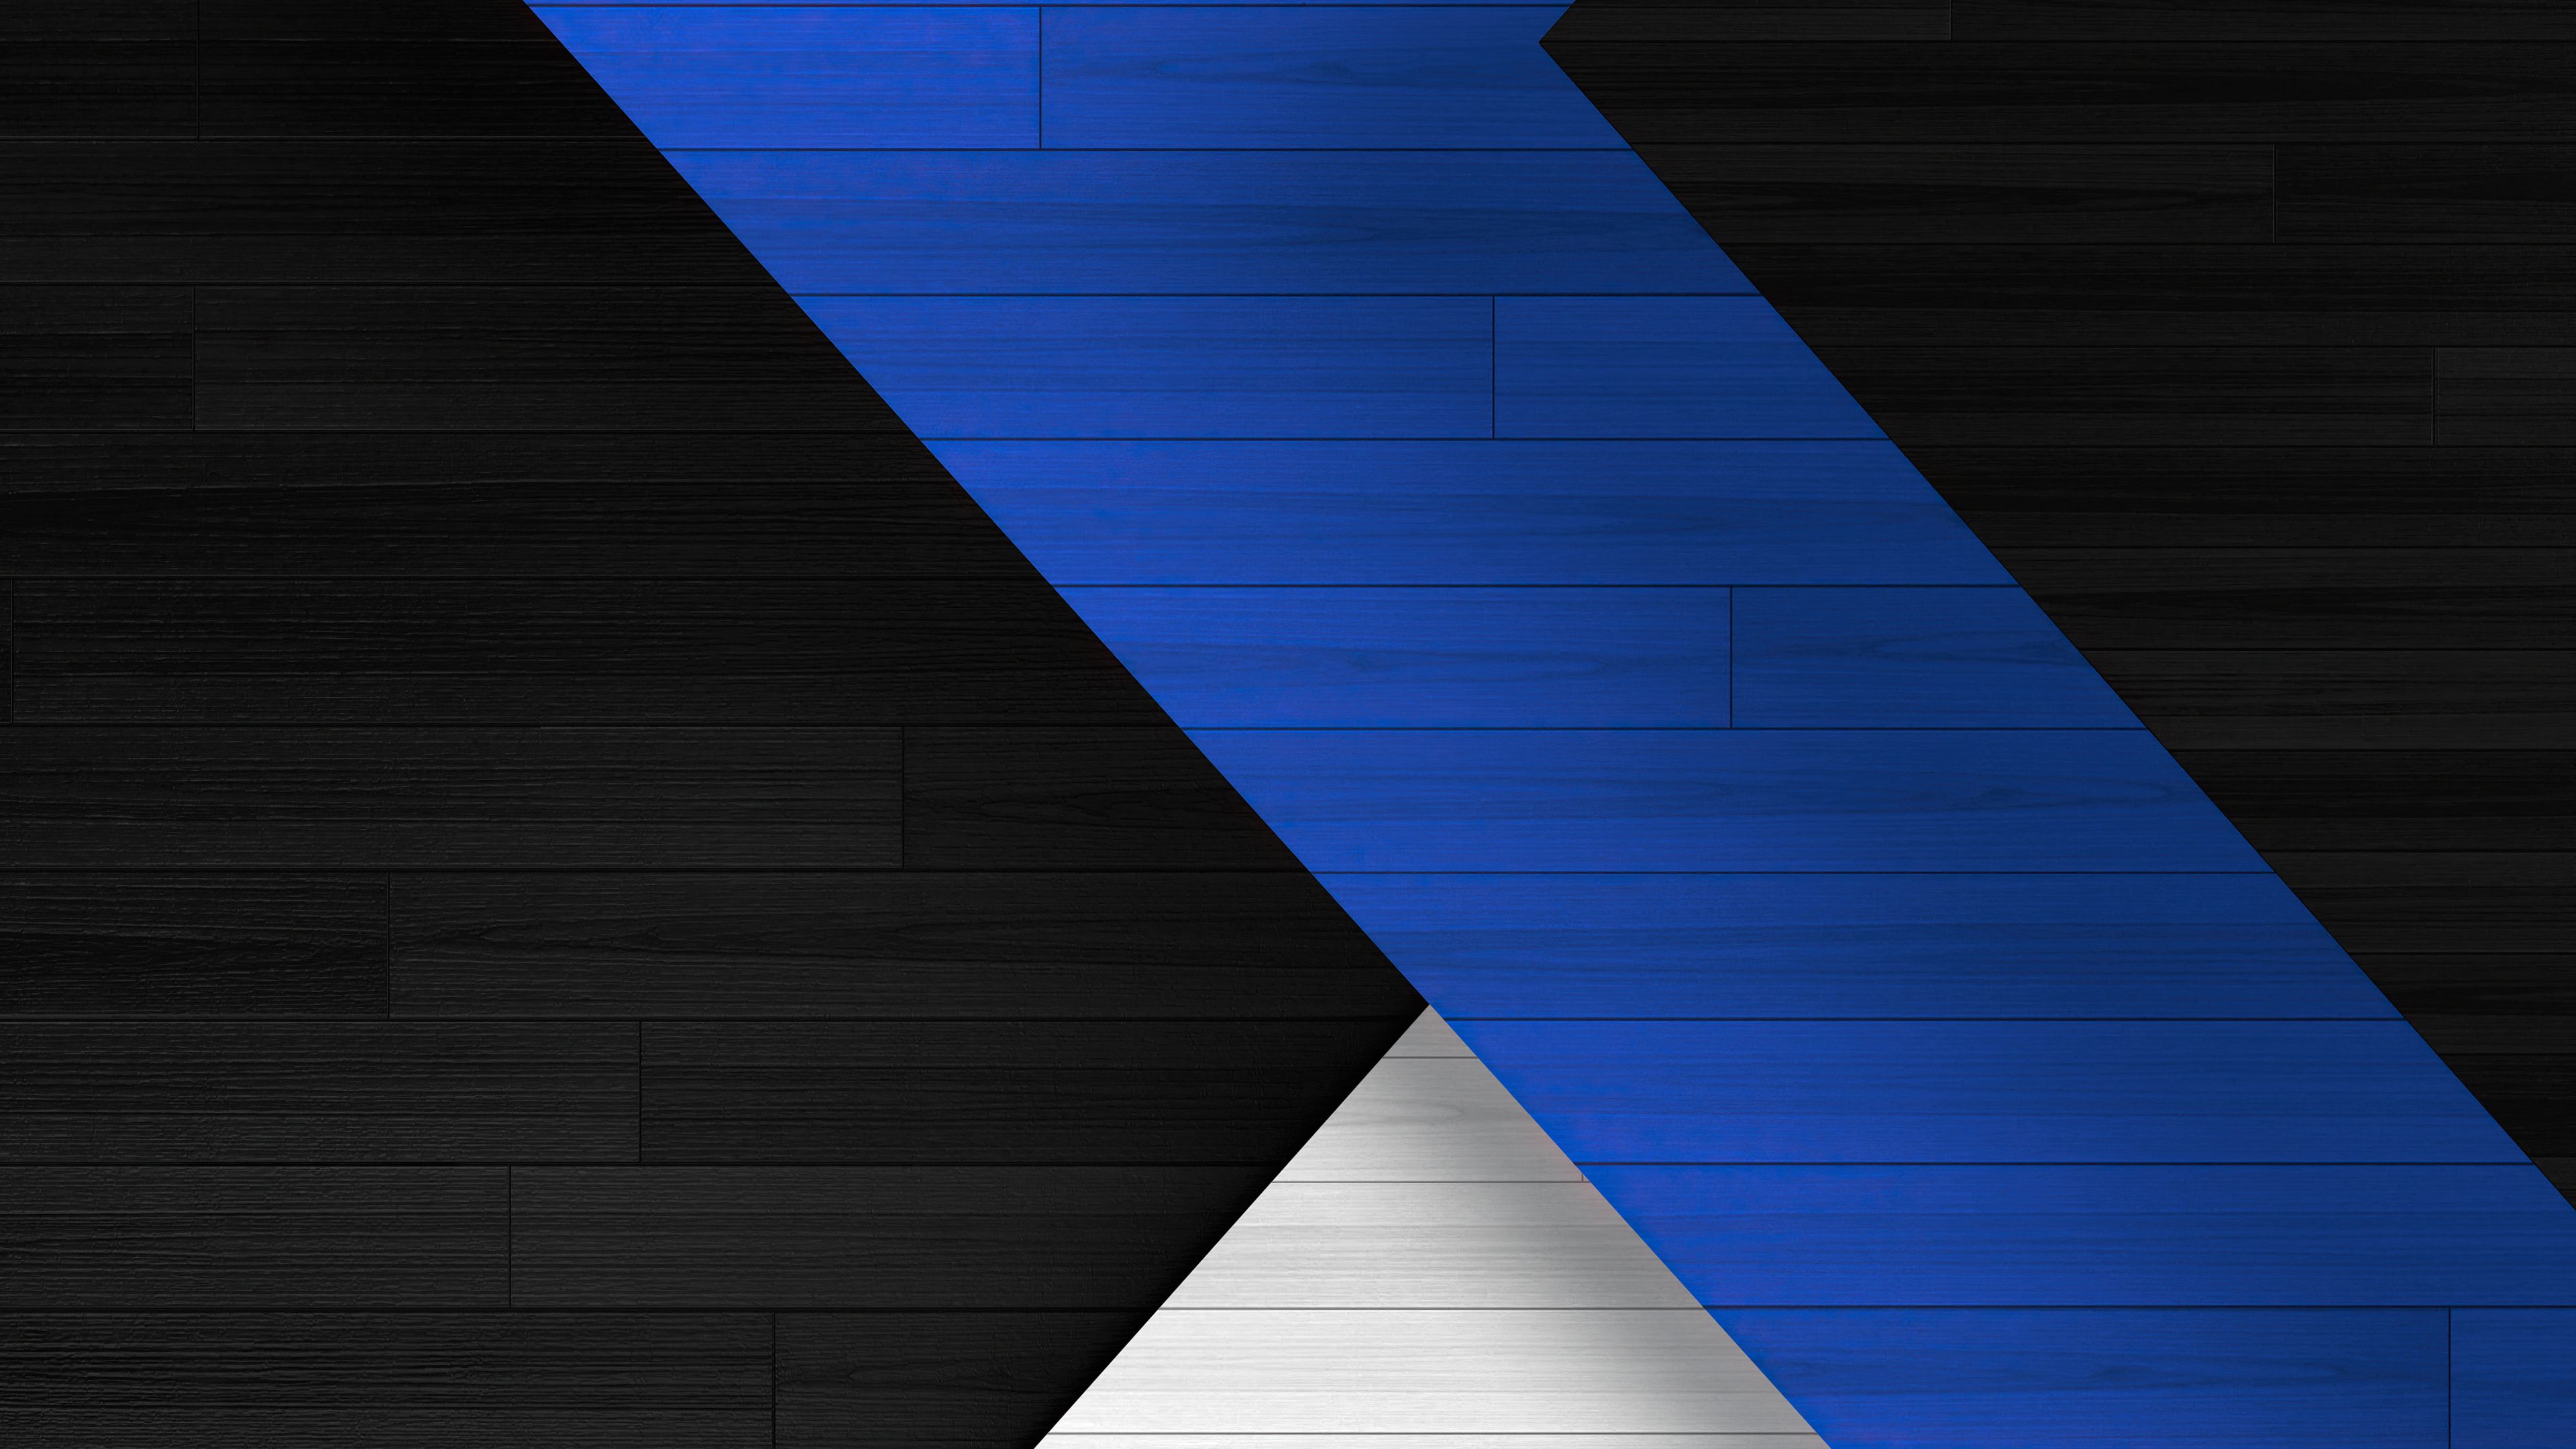 4k Blue And White Wallpapers - Wallpaper Cave